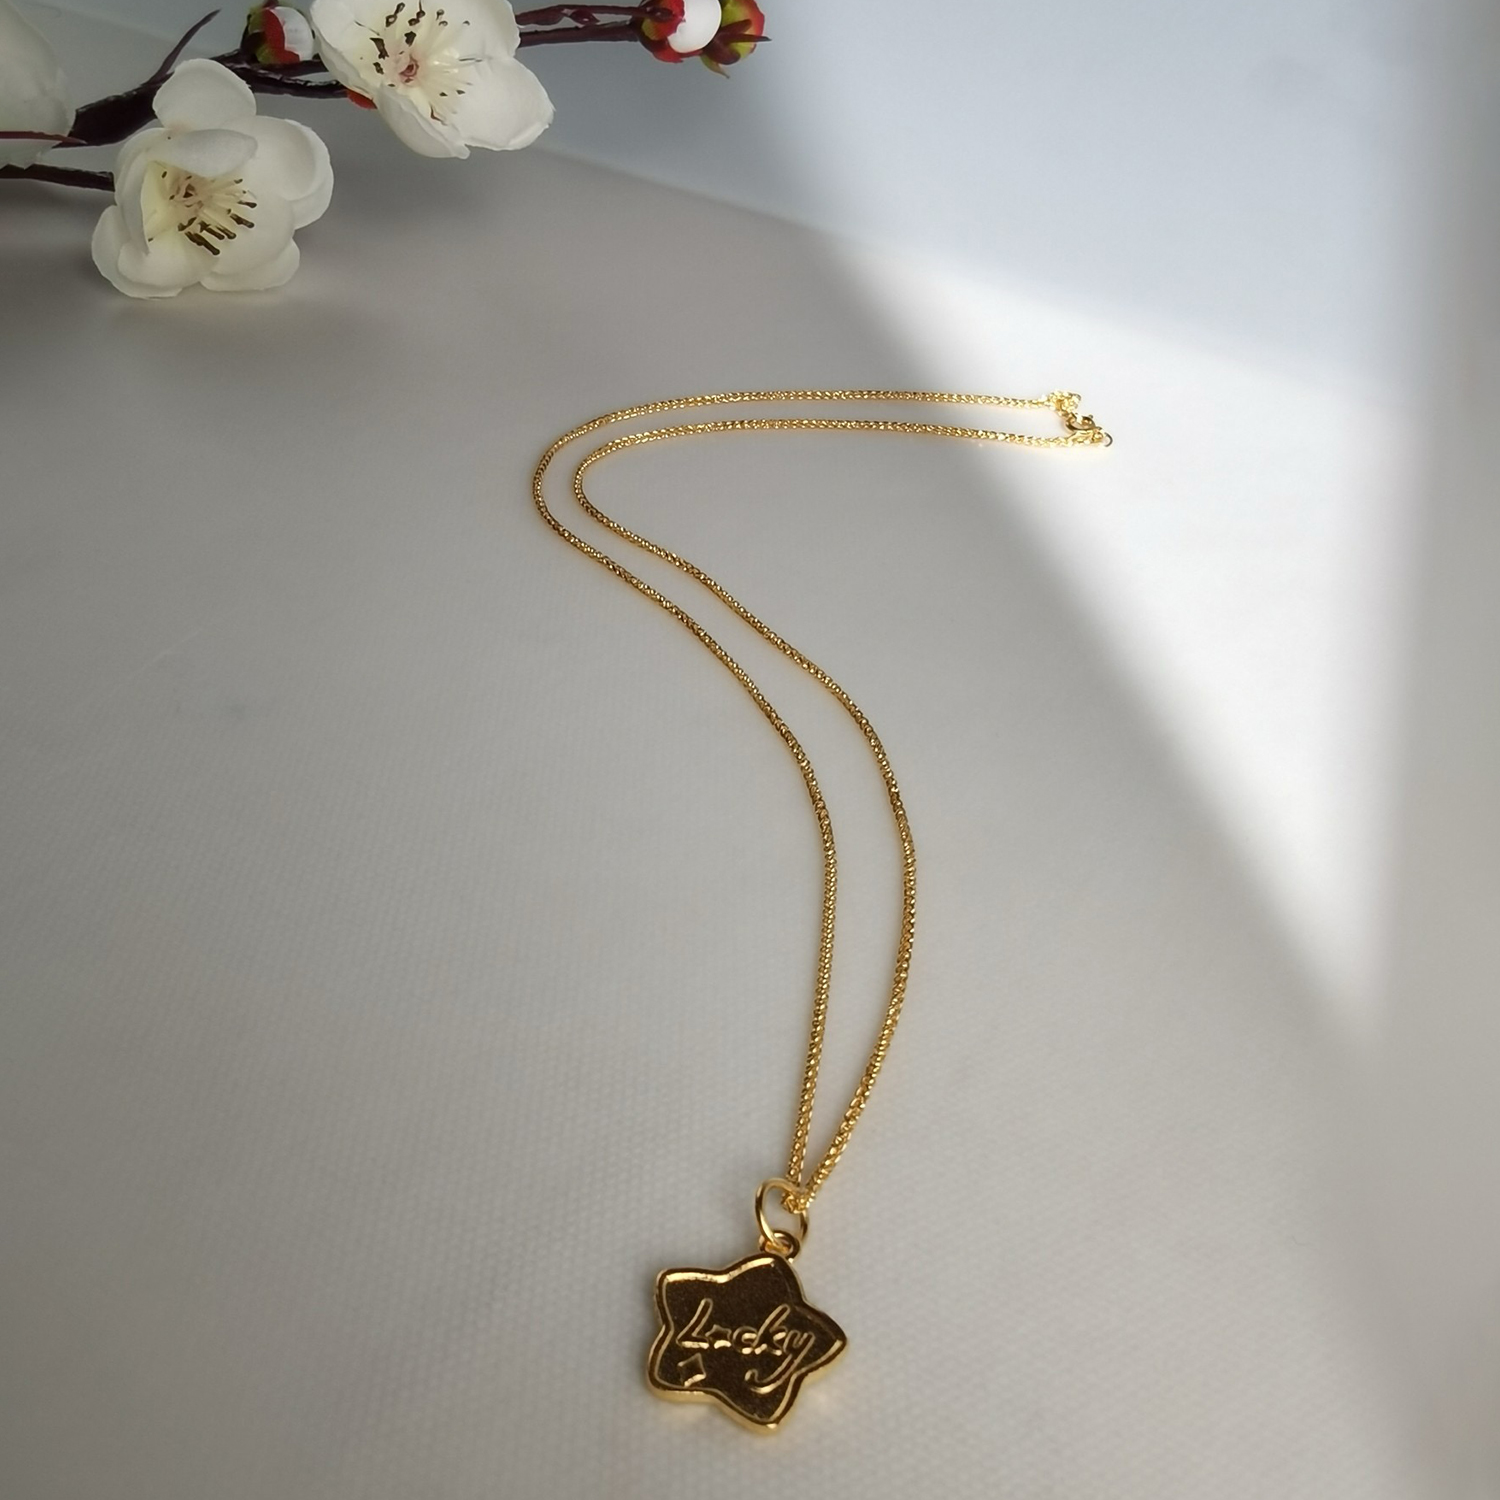 Alluvial Gold Vacuum Electroplating 24K Gold Star to Dragon Necklace